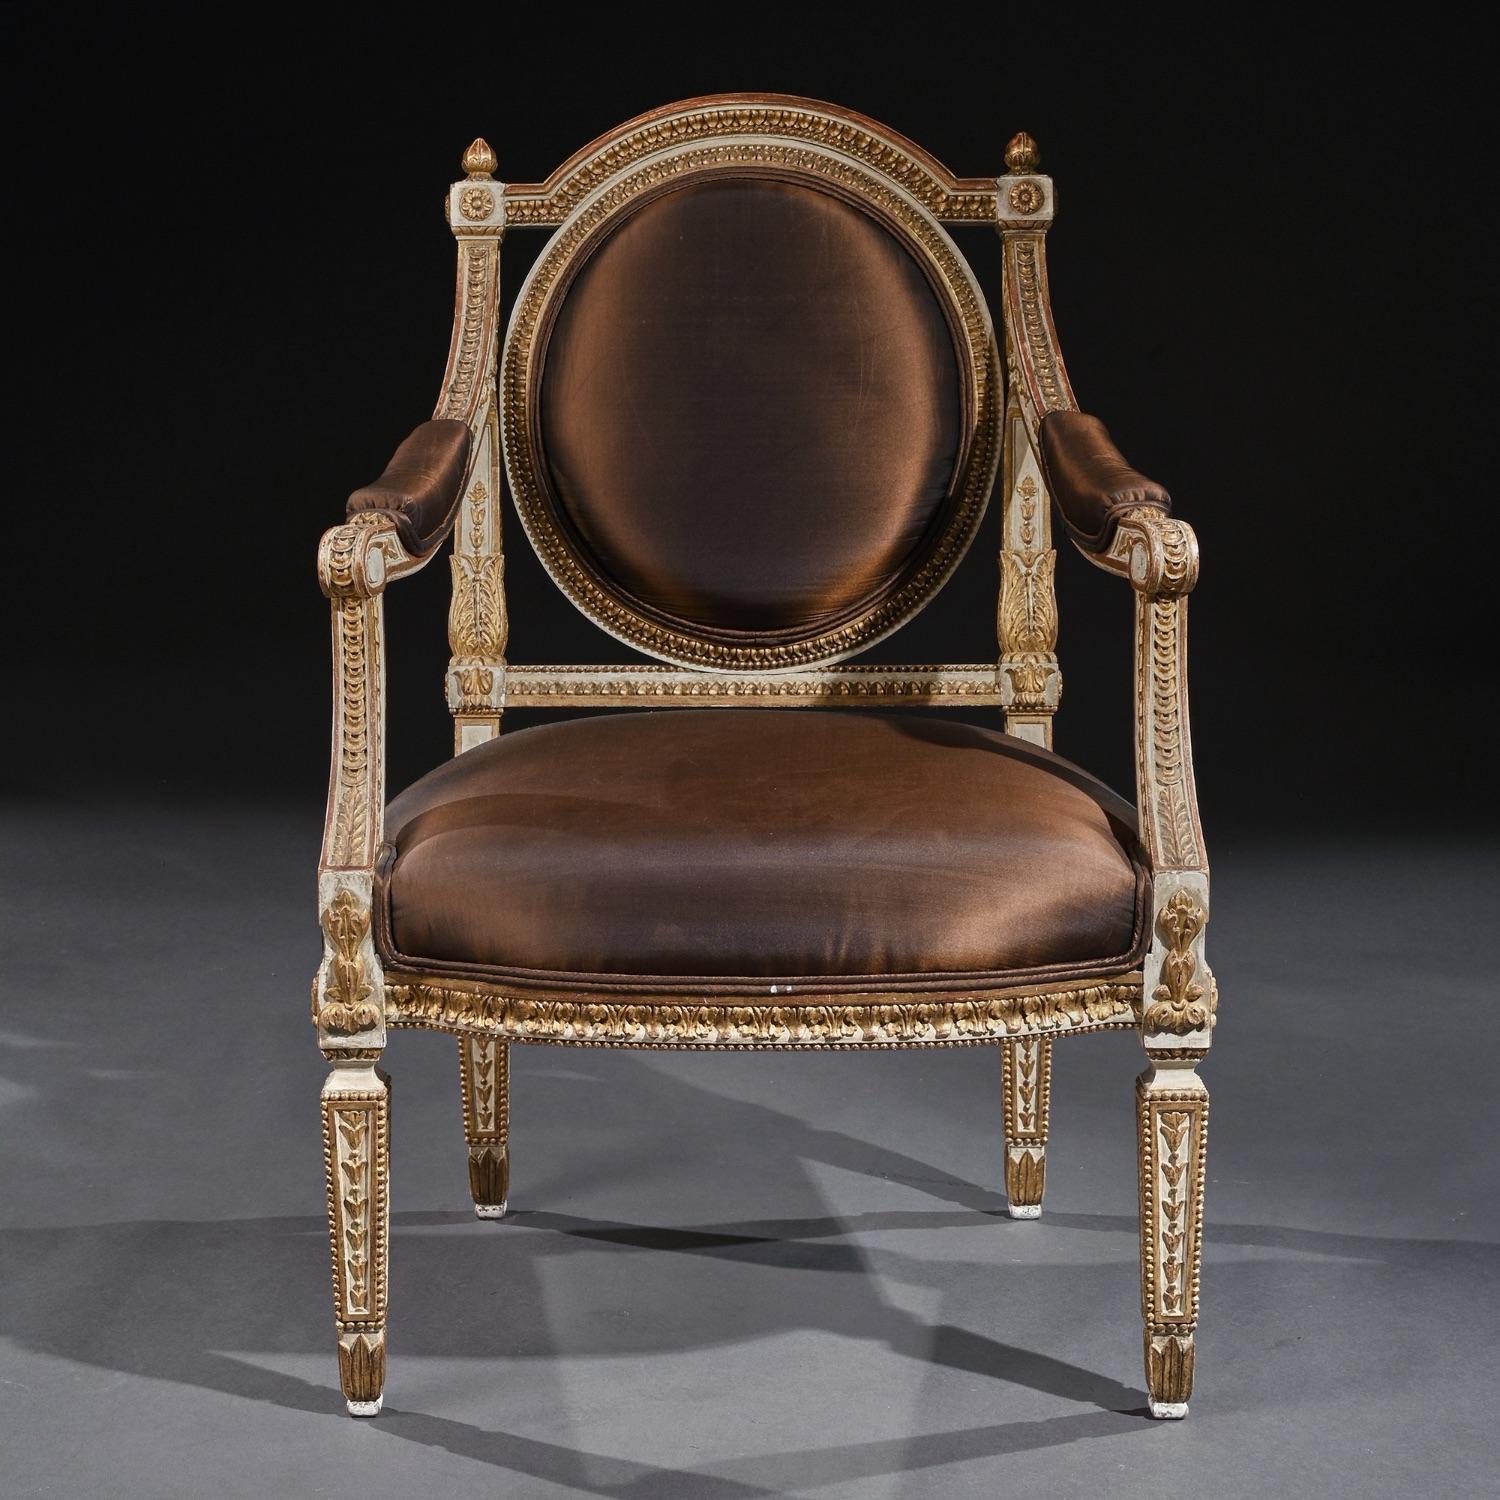 Extremely fine pair of decorative 19th century Italian painted and parcel gilt armchairs of neoclassical design.

Italian late 19th century, circa 1880.

Oozing style these very attractive parcel gilt armchairs have husk and foliate-carved